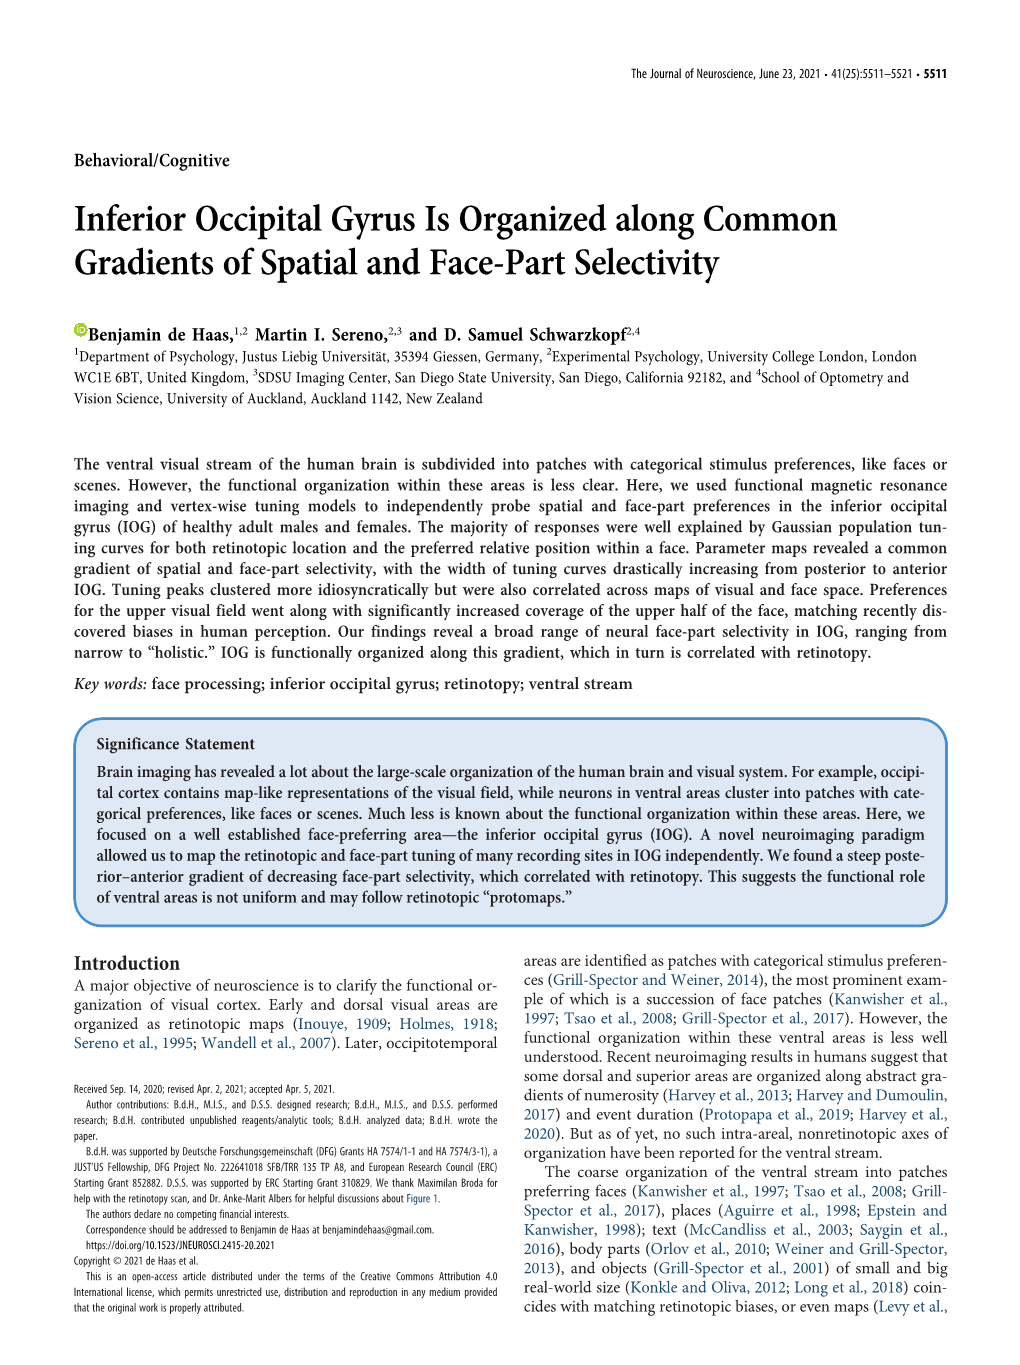 Inferior Occipital Gyrus Is Organized Along Common Gradients of Spatial and Face-Part Selectivity